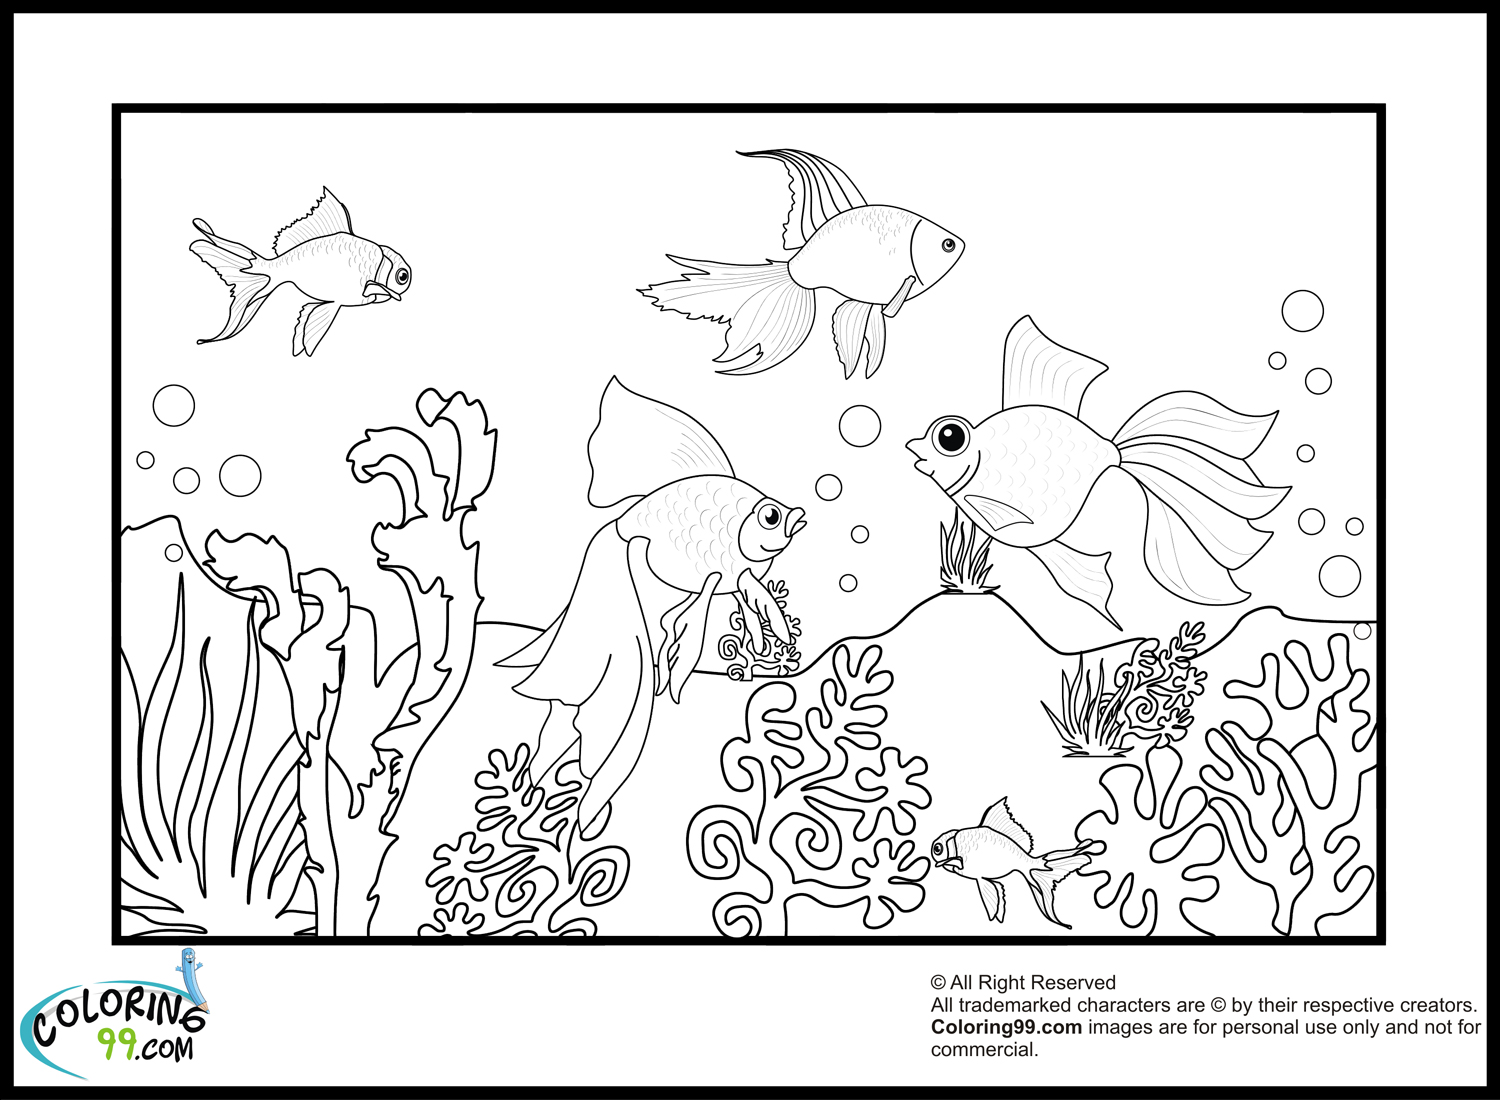 Goldfish Coloring Pages | Team colors